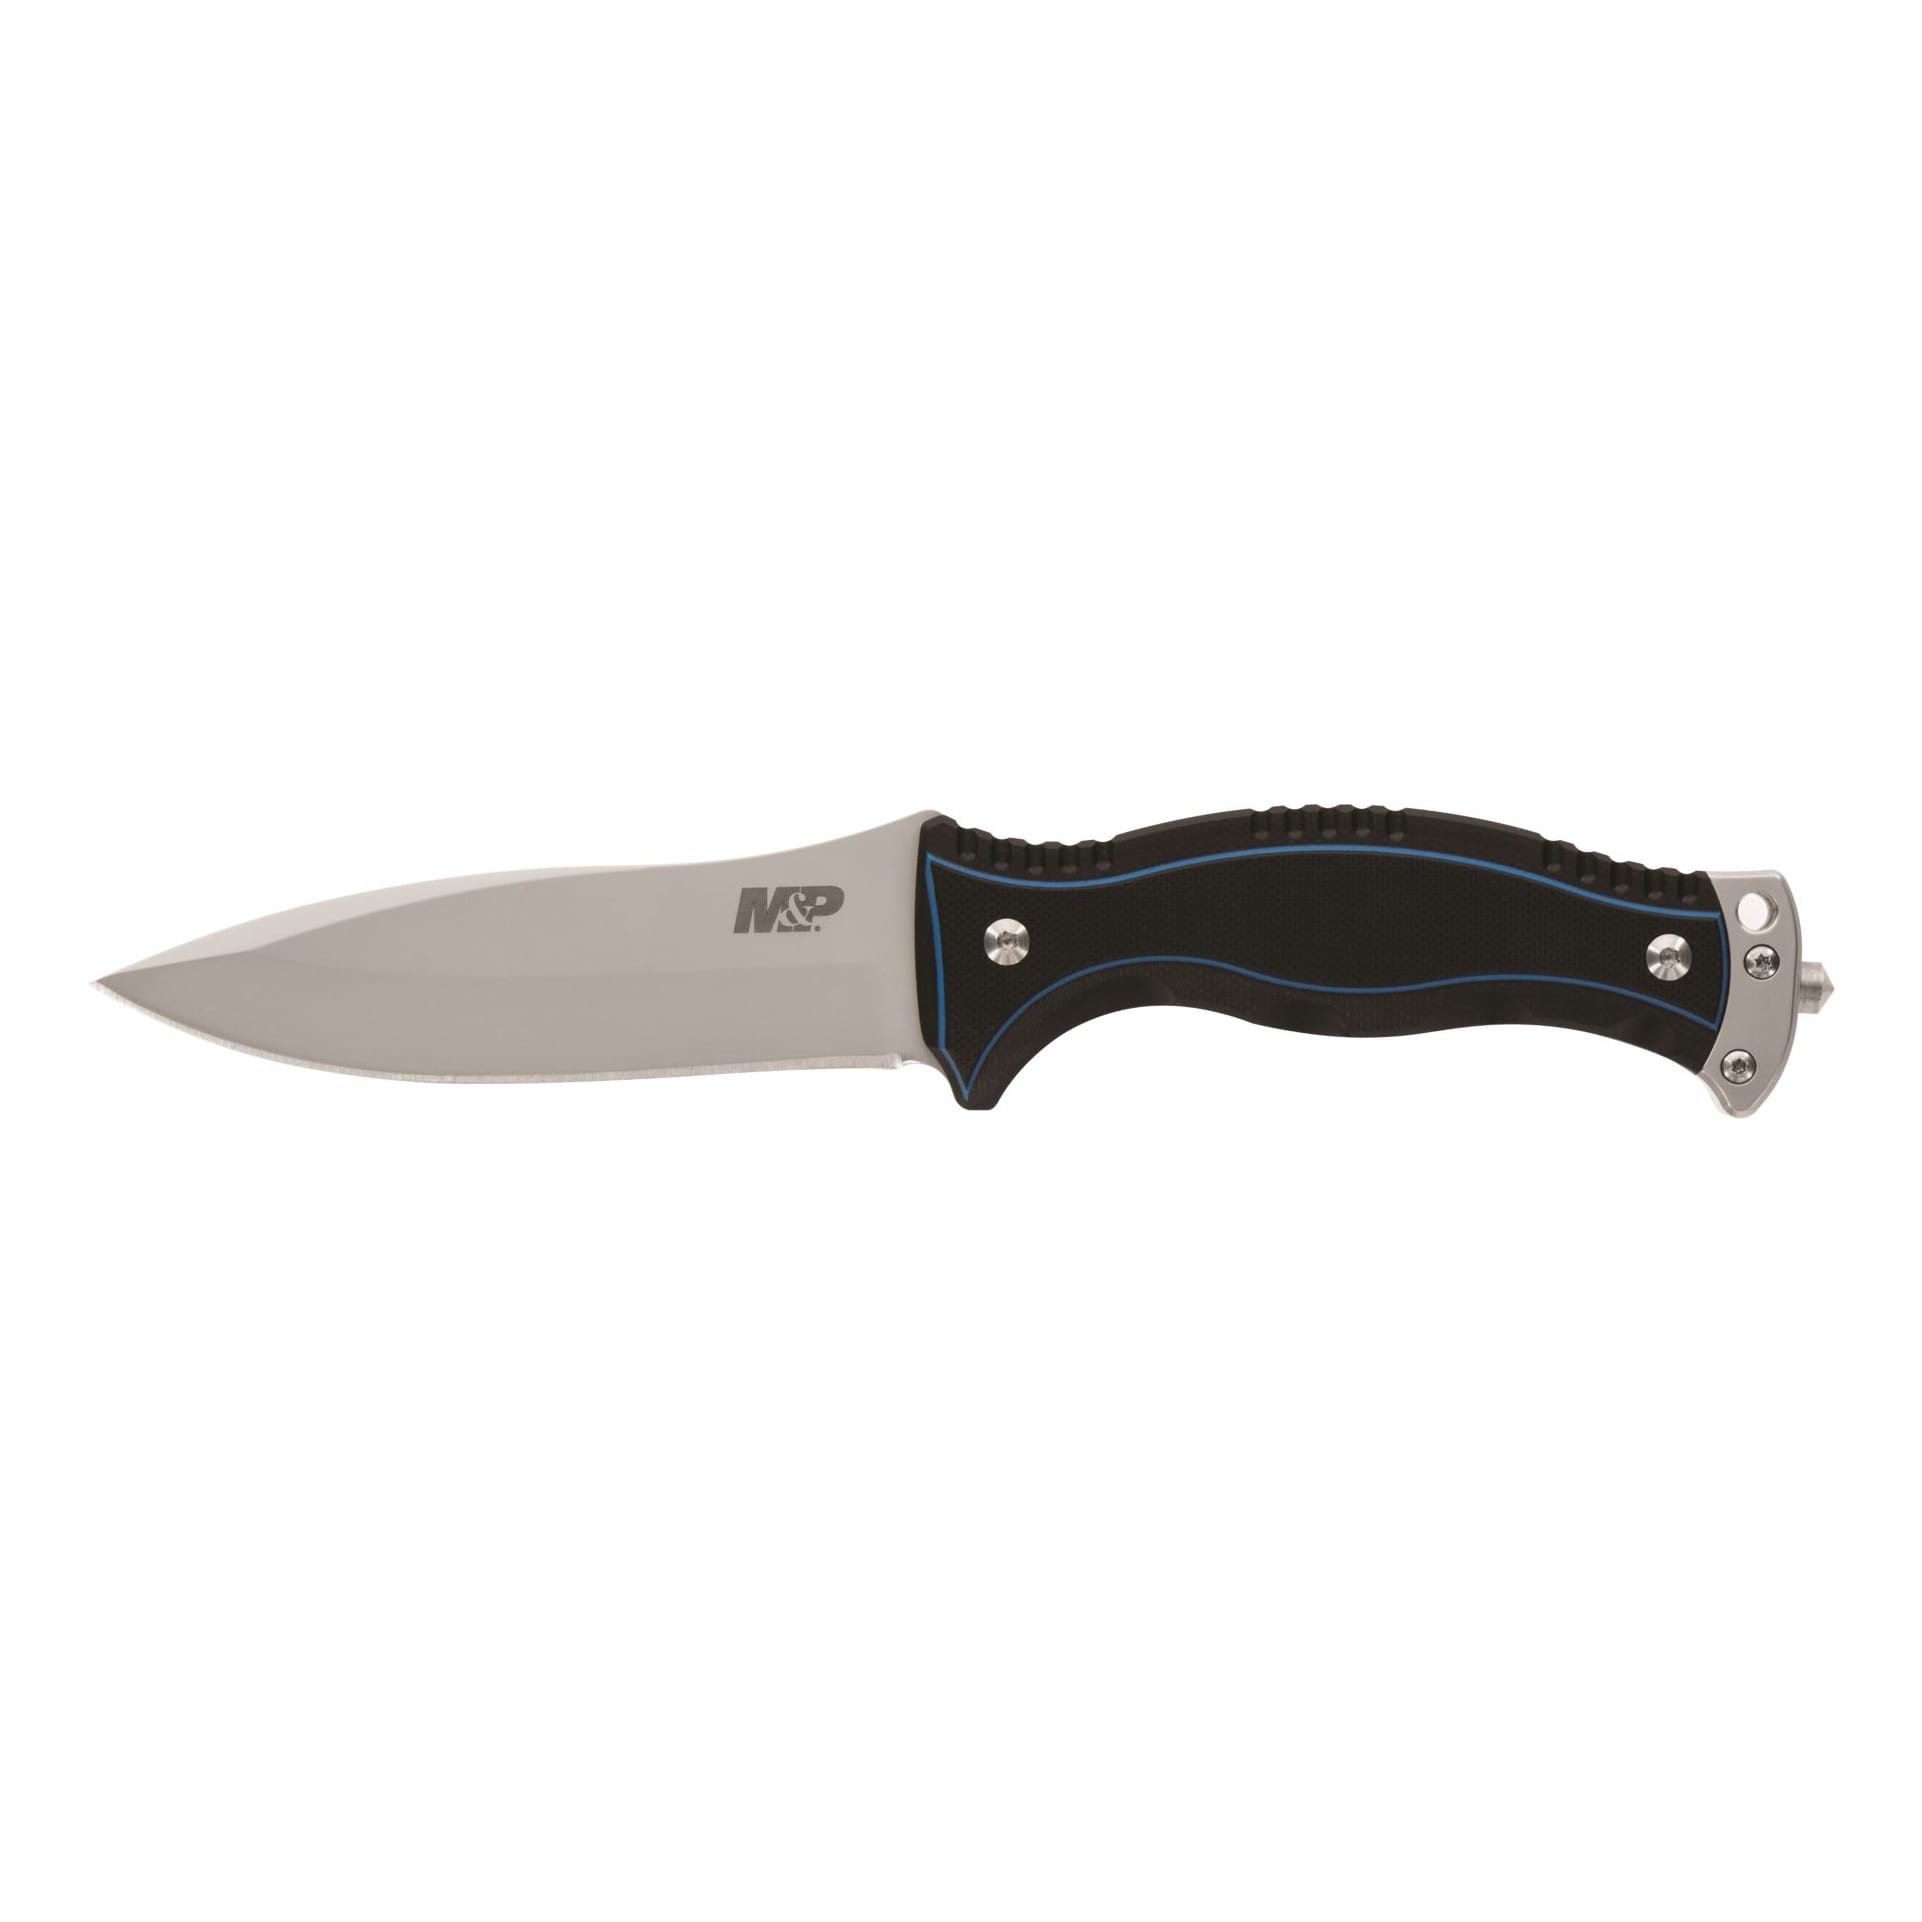 Smith & Wesson M&P Officer Fixed Blade Knife